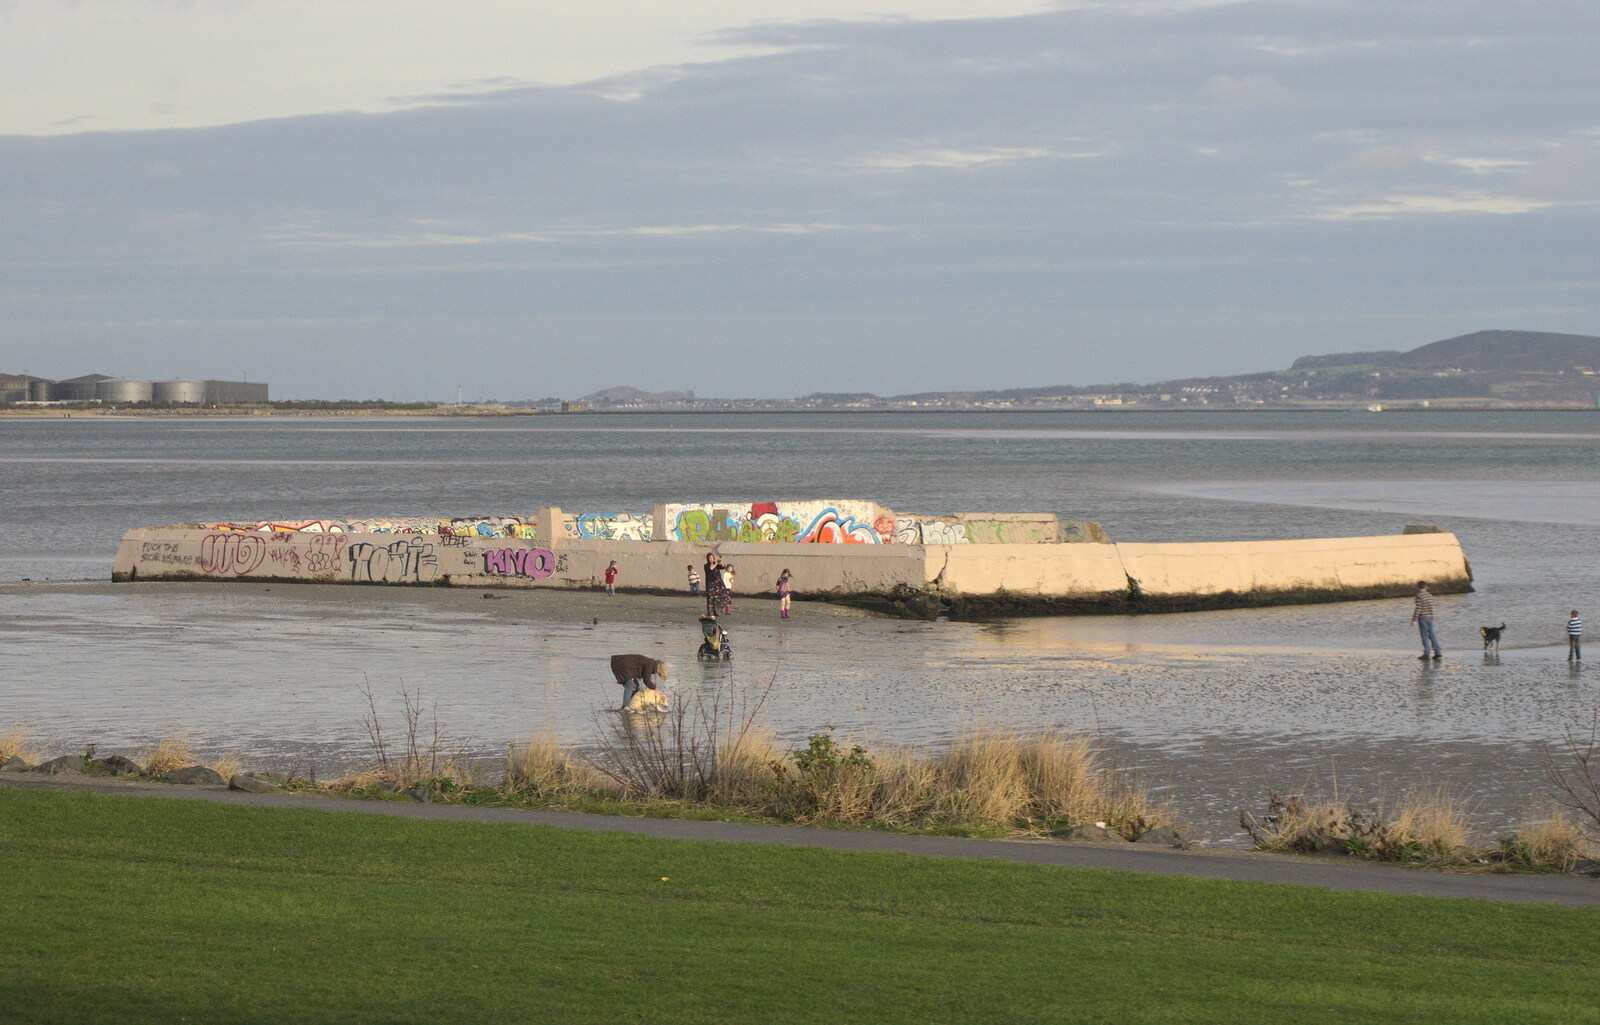 The off-shore Lido is popular with dog walkers from A Morning in Blackrock, County Dublin, Ireland - 8th January 2012